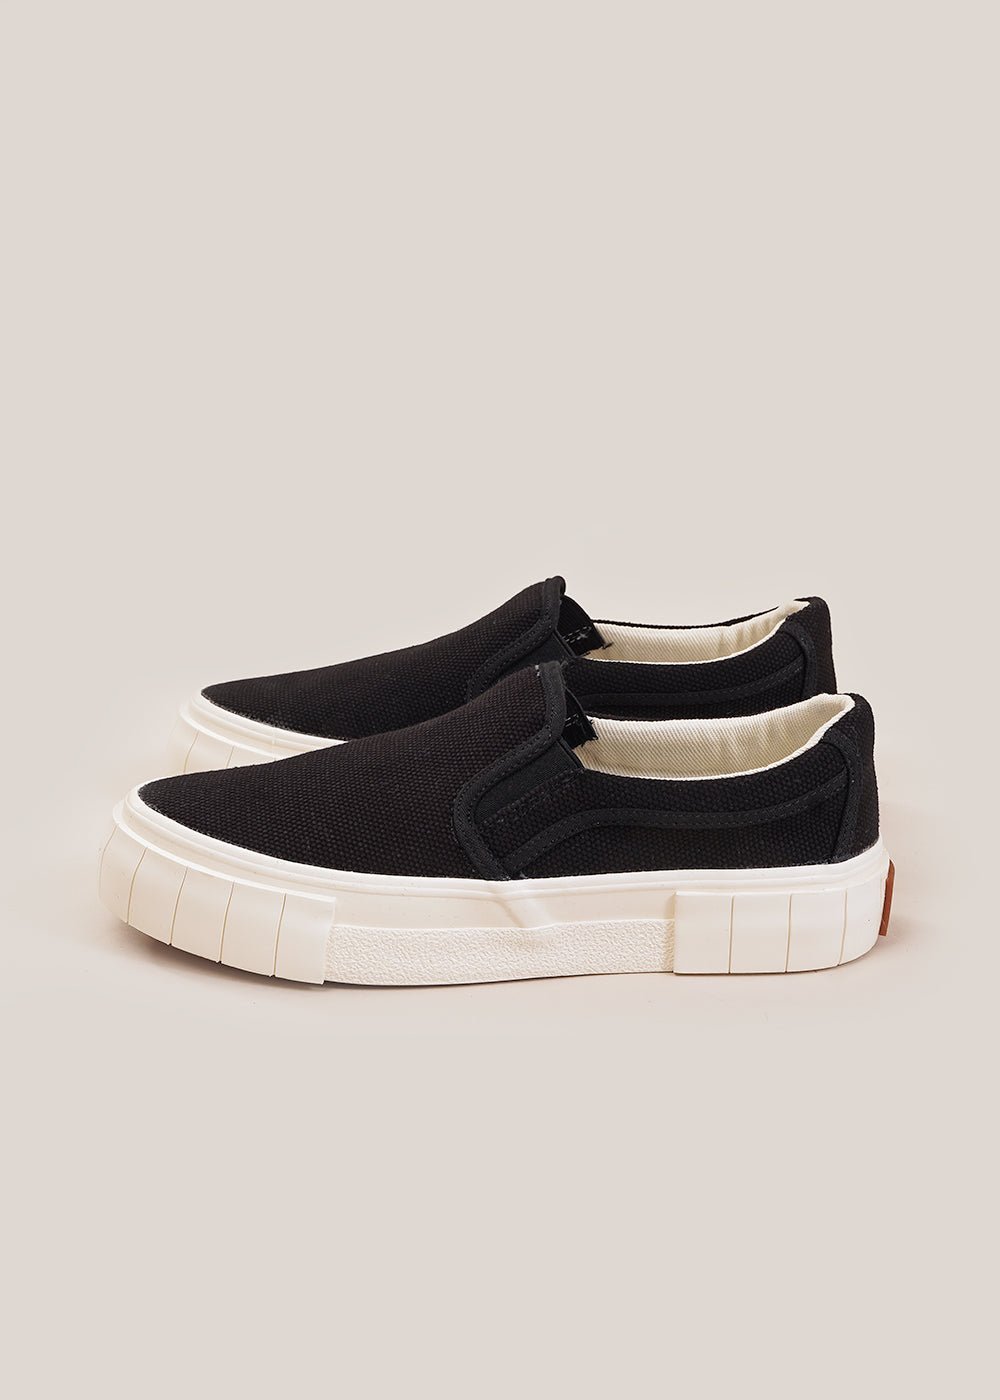 GOOD NEWS Black Yess Core Sneakers - New Classics Studios Sustainable Ethical Fashion Canada